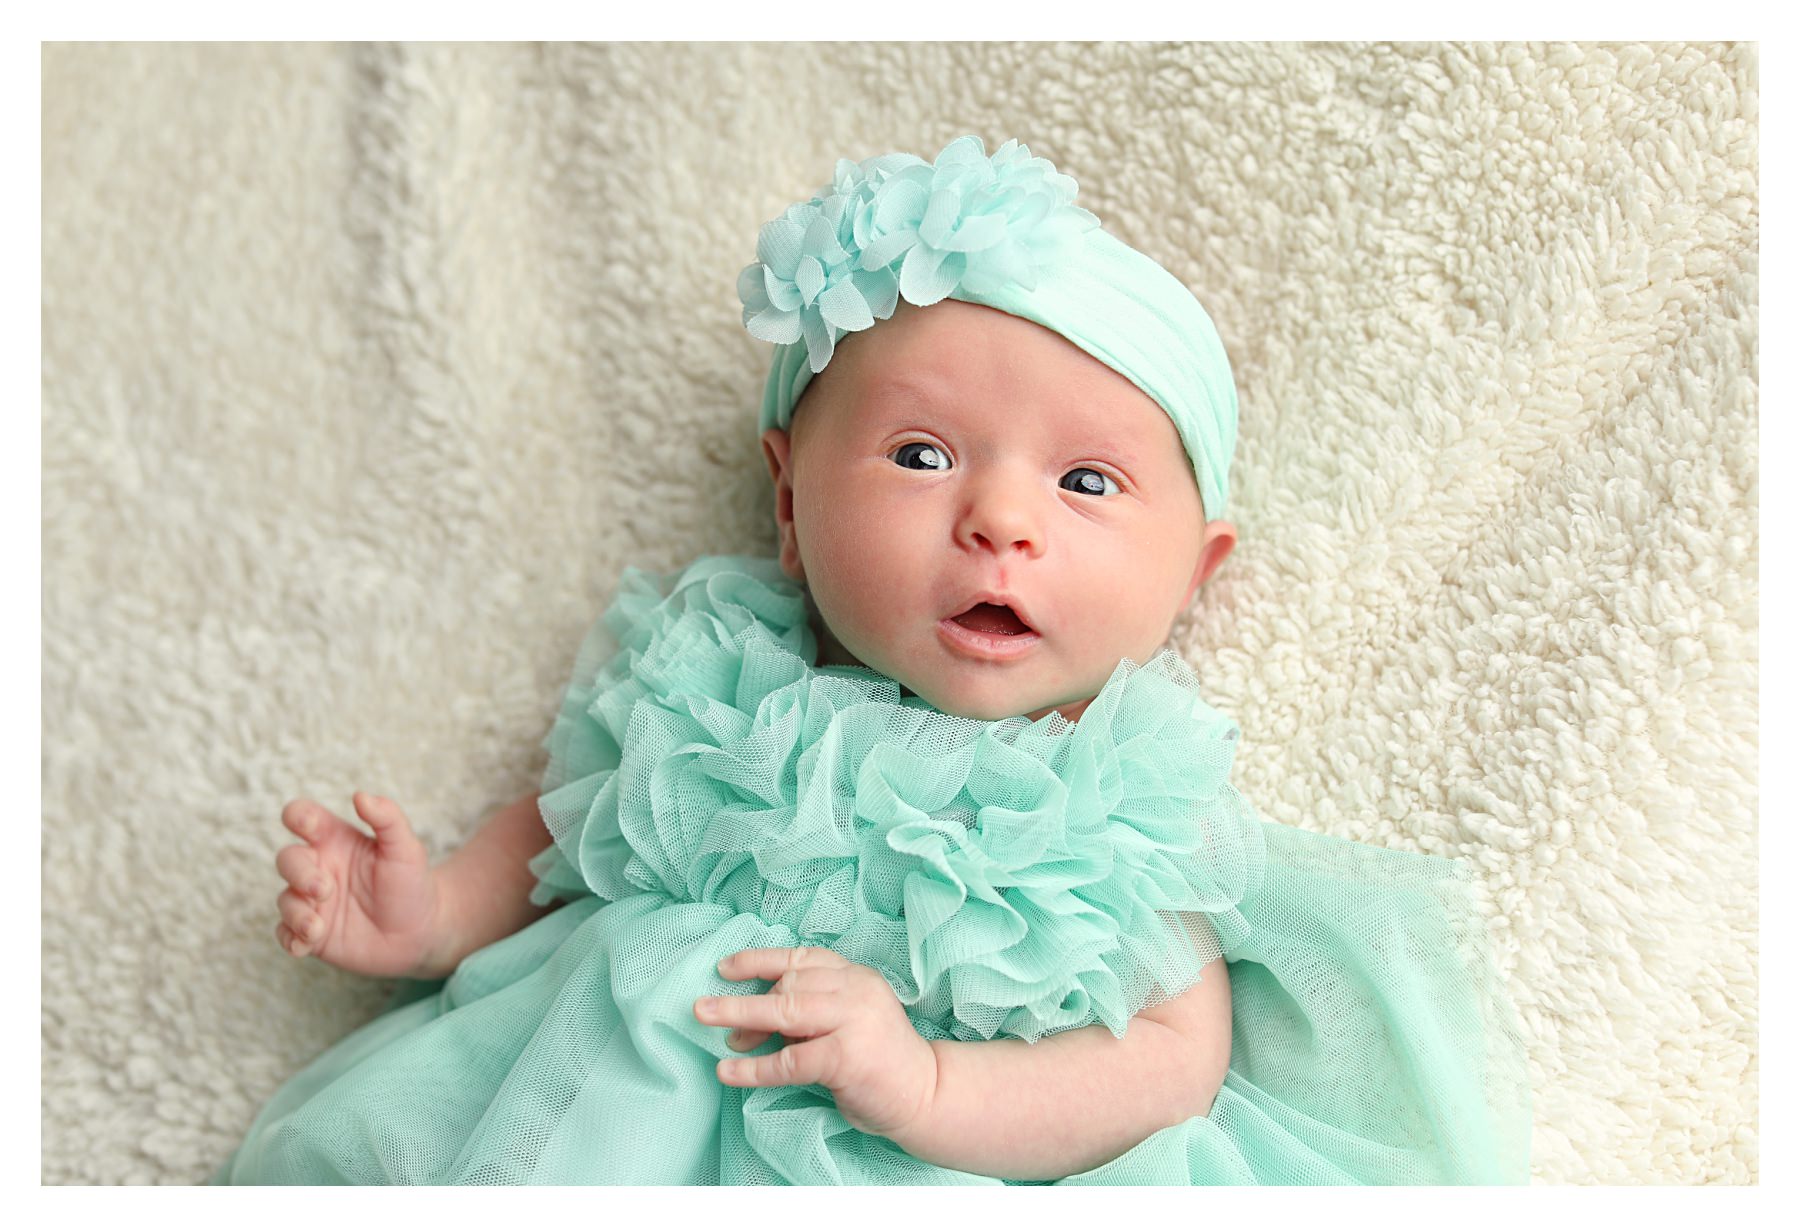 newborn photo studio picture with girl in teal dress